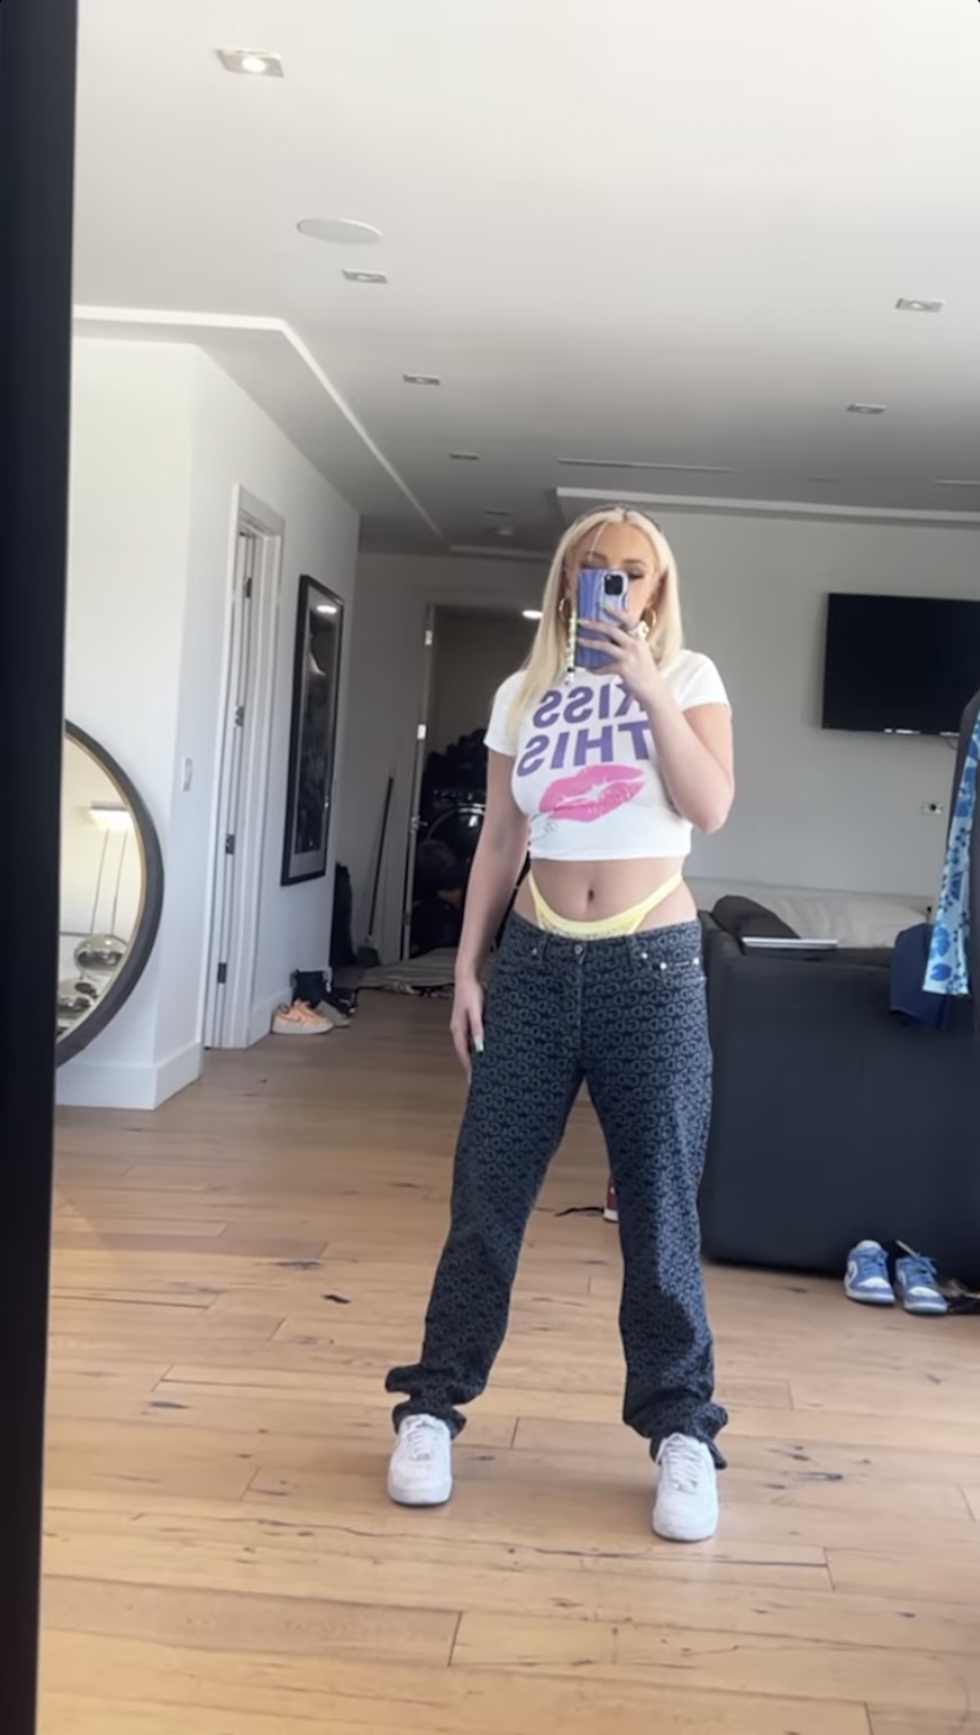 Tana Mongeau Just Rocked the Visible Thong Trend